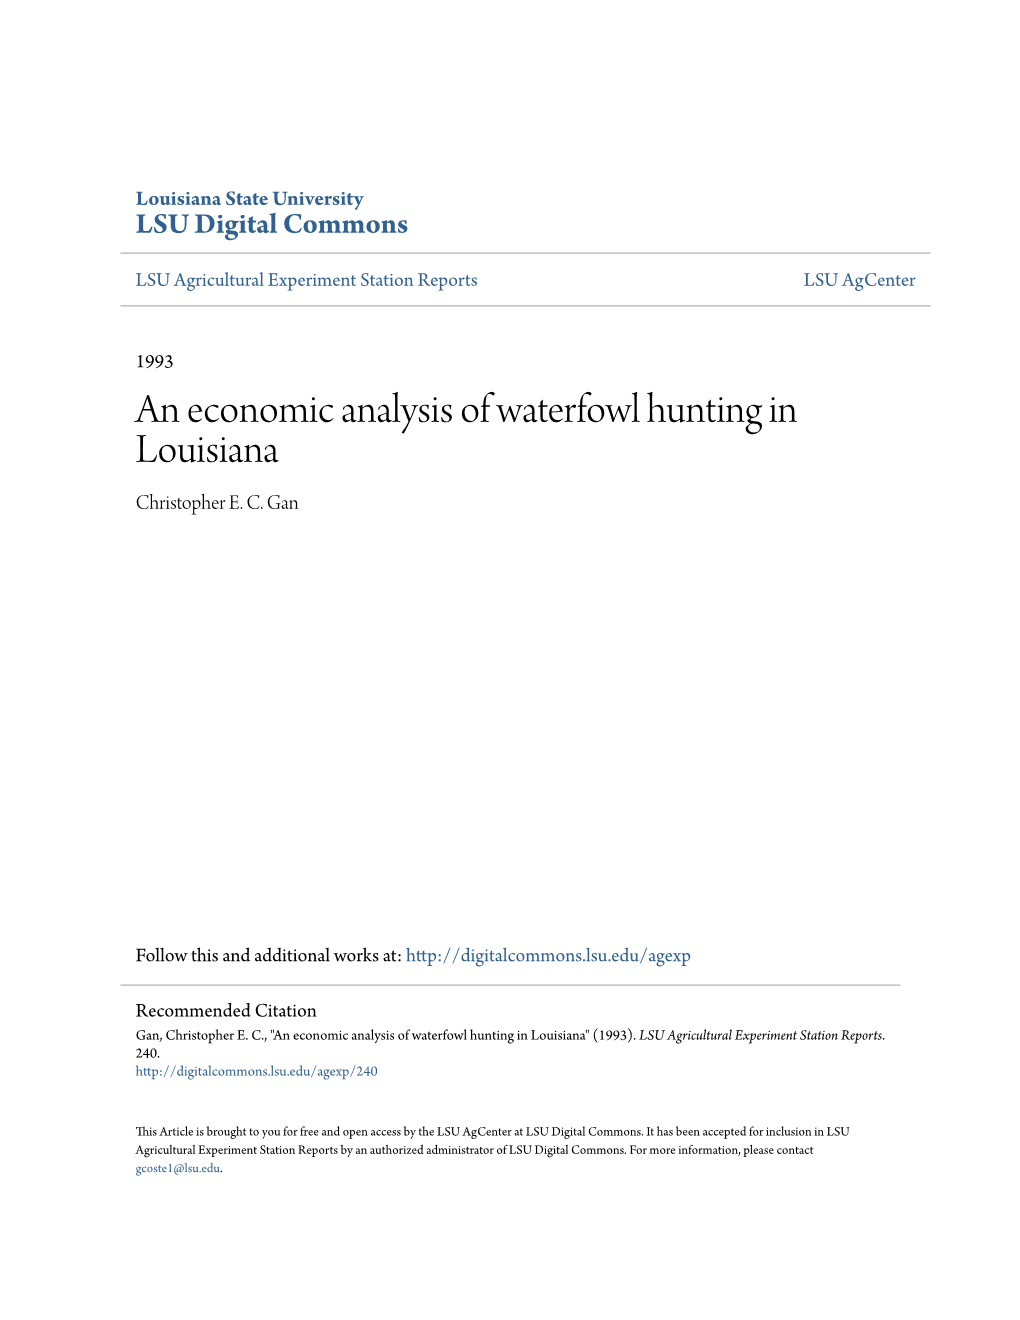 An Economic Analysis of Waterfowl Hunting in Louisiana Christopher E